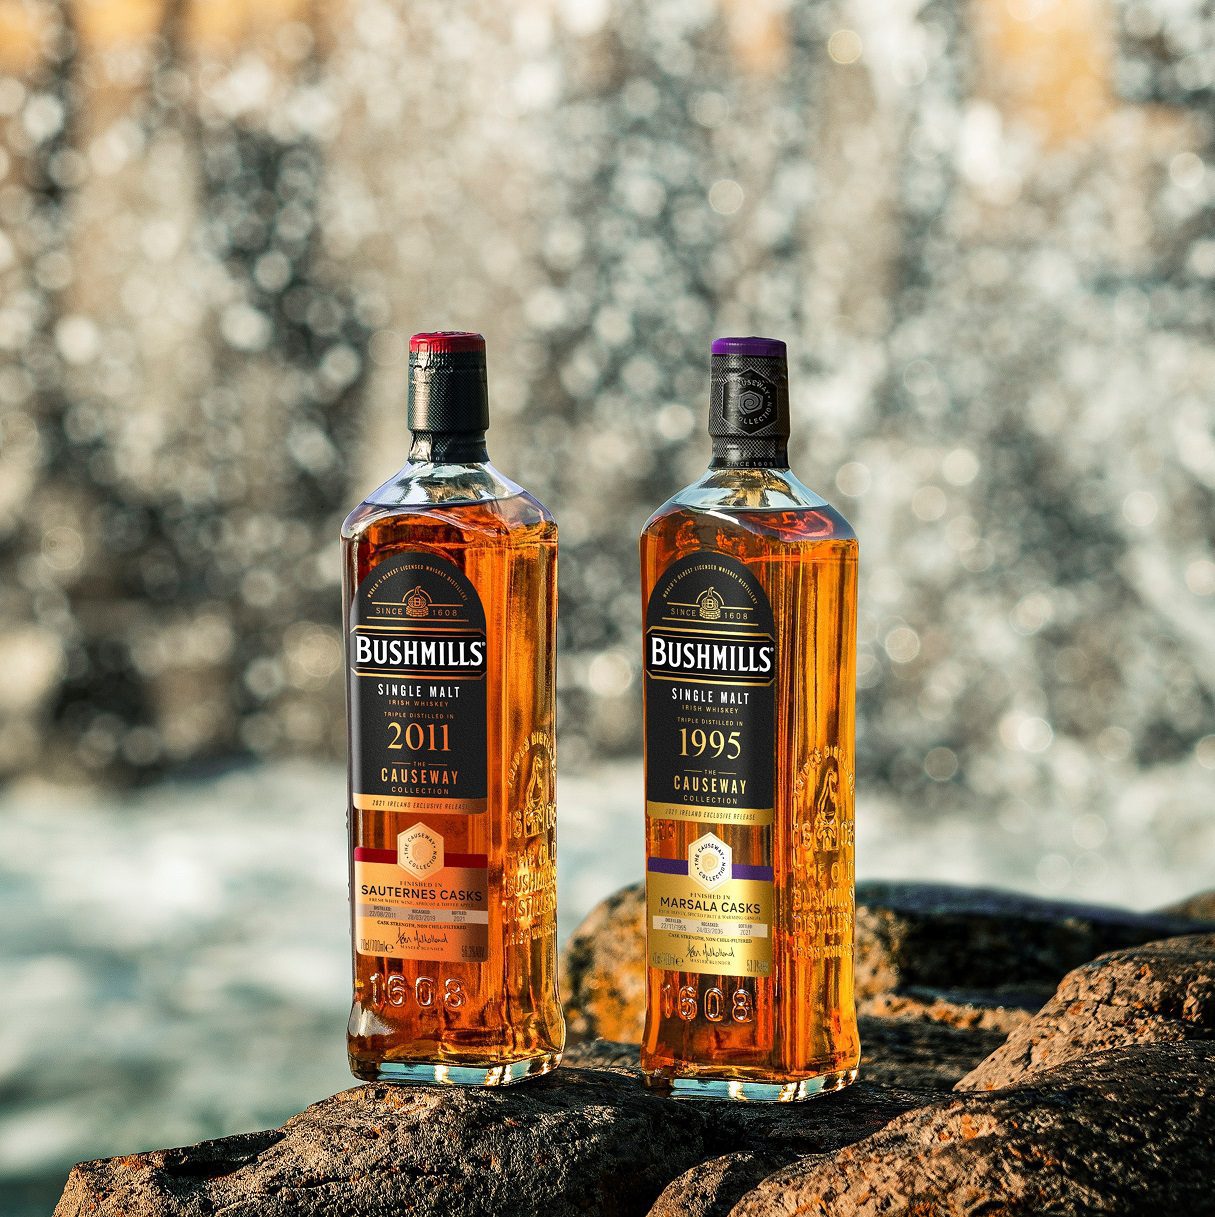 Bushmills Causeway Collection 2021nbsp- Bushmills Irish Whiskeyis set to make waves again with its new series of exclusive and elusive Single Malt Causeway Collection releases for 2021 - International Whiskey Reviews by Irish Whiskey Blogger Stuart McNamara